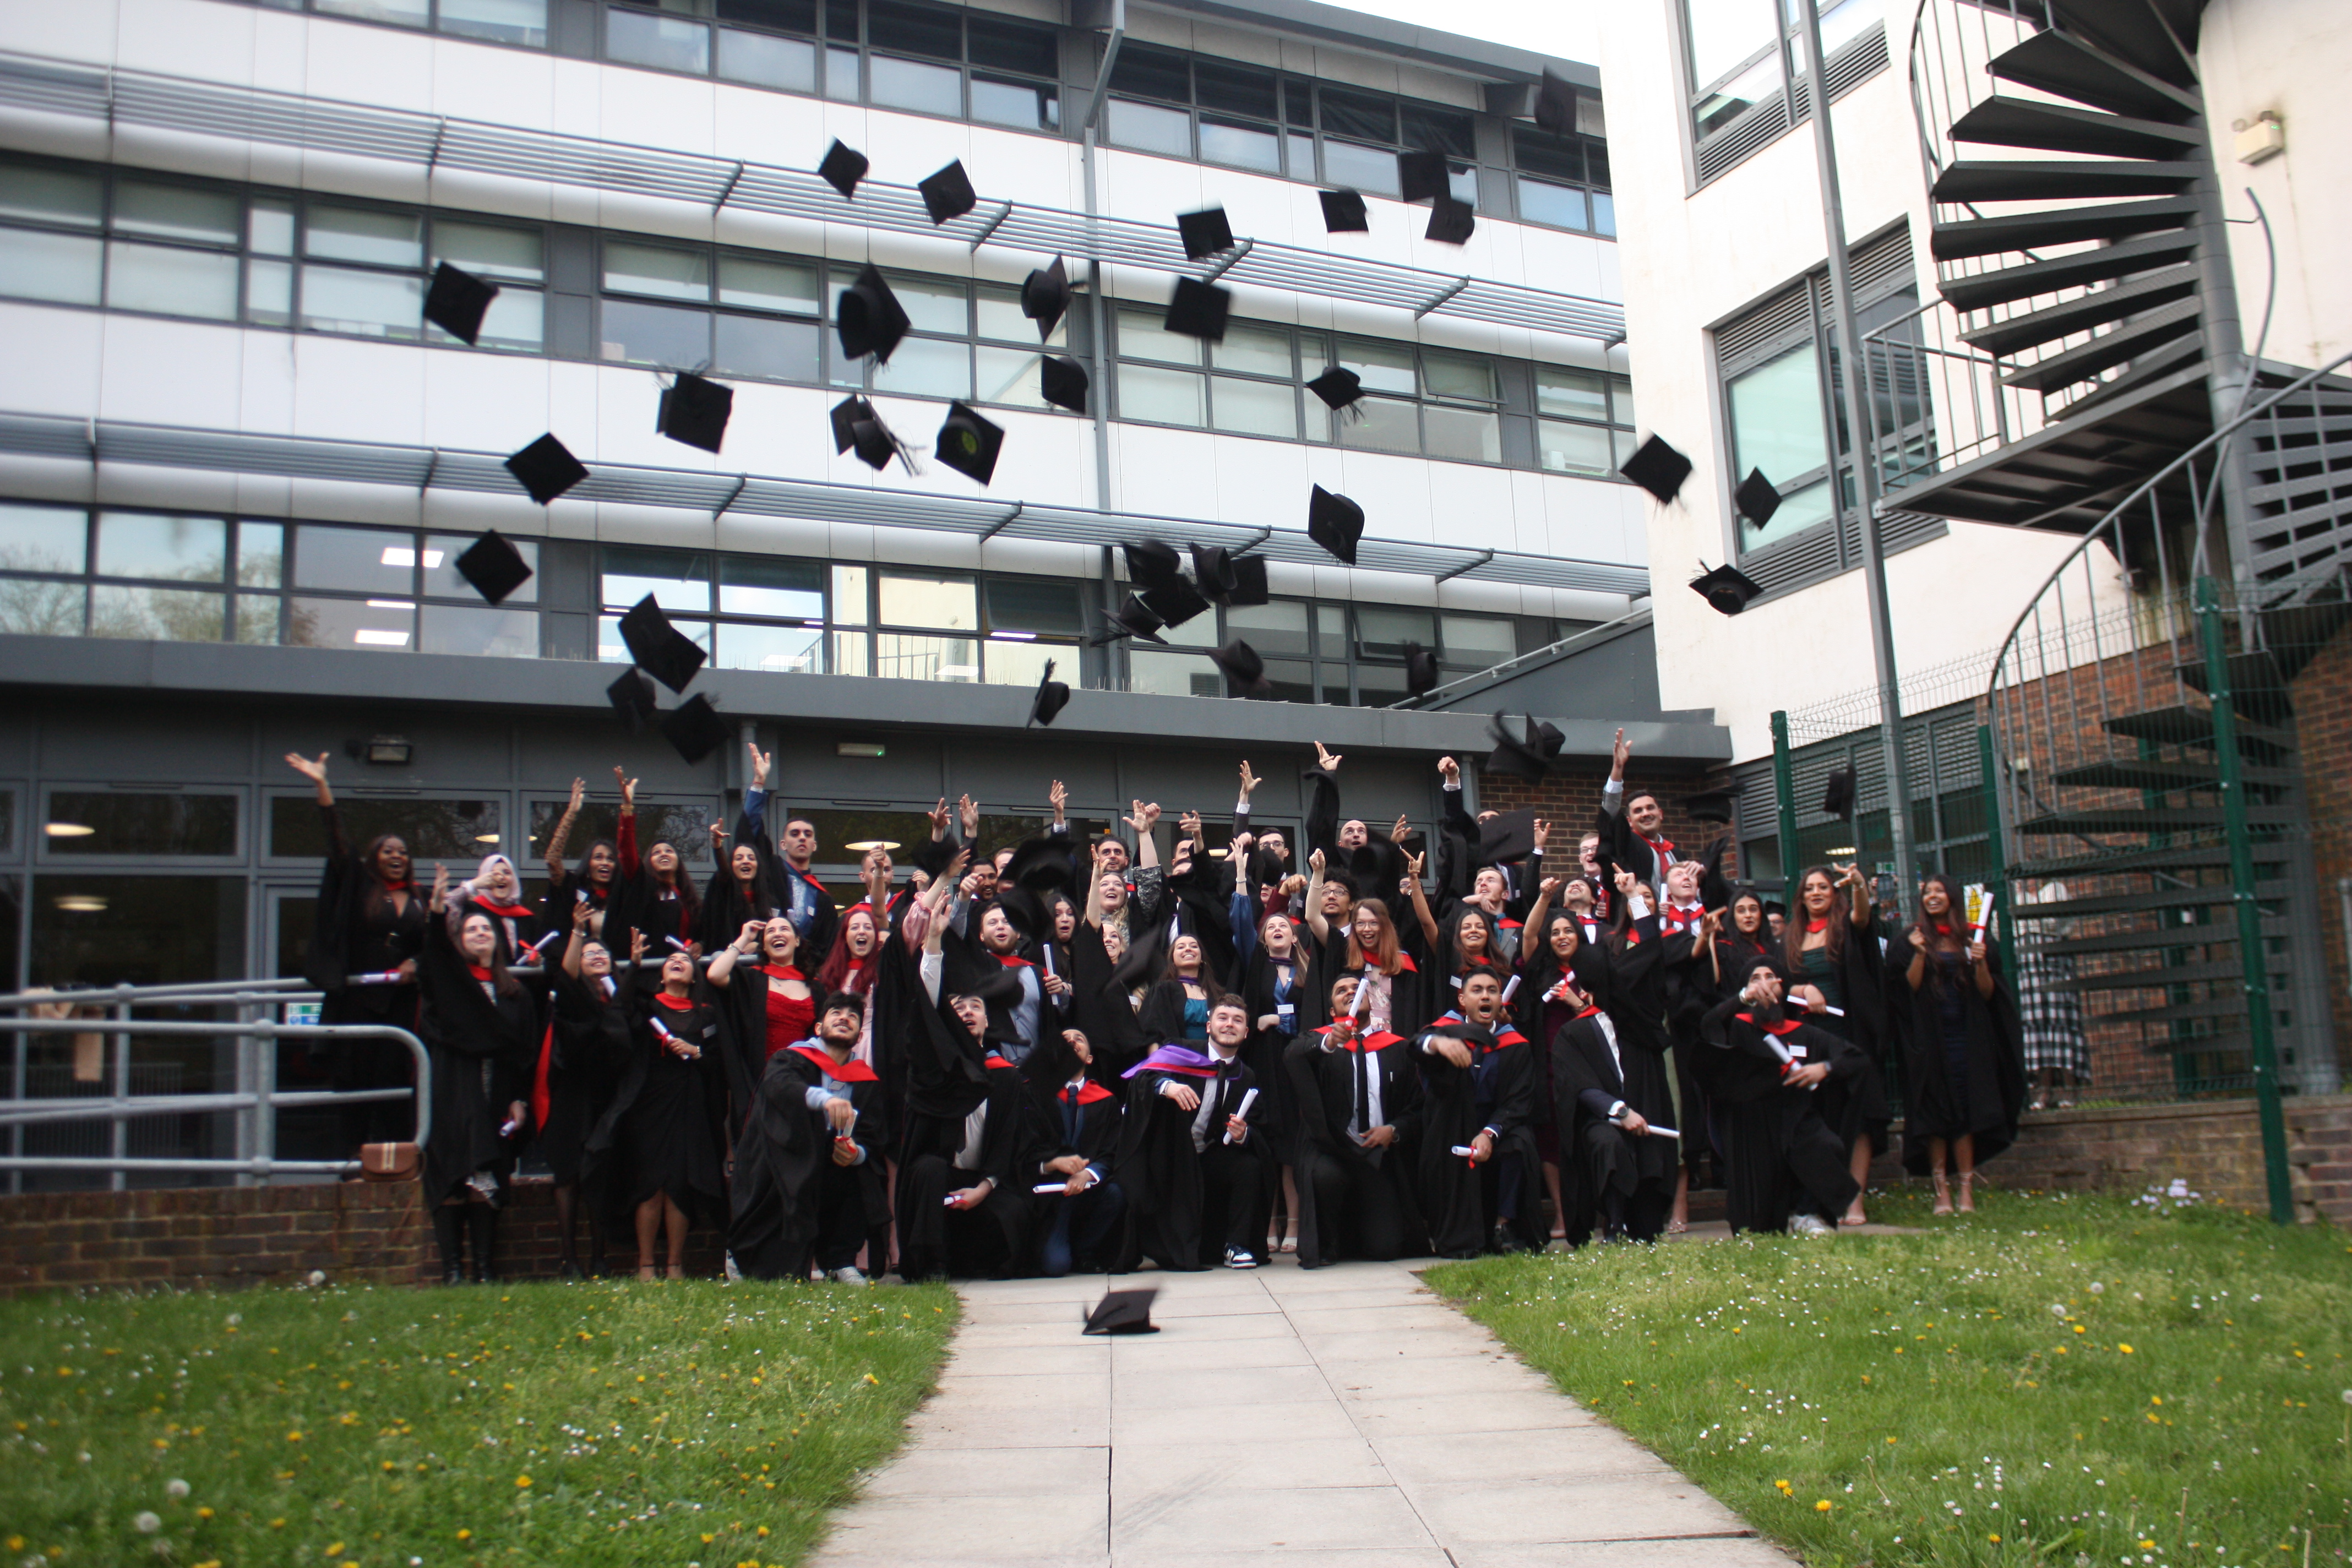 Group of 50 Uxbridge College and Harrow College graduates outside the Uxbridge College building throwing caps in the air at graduation ceremony